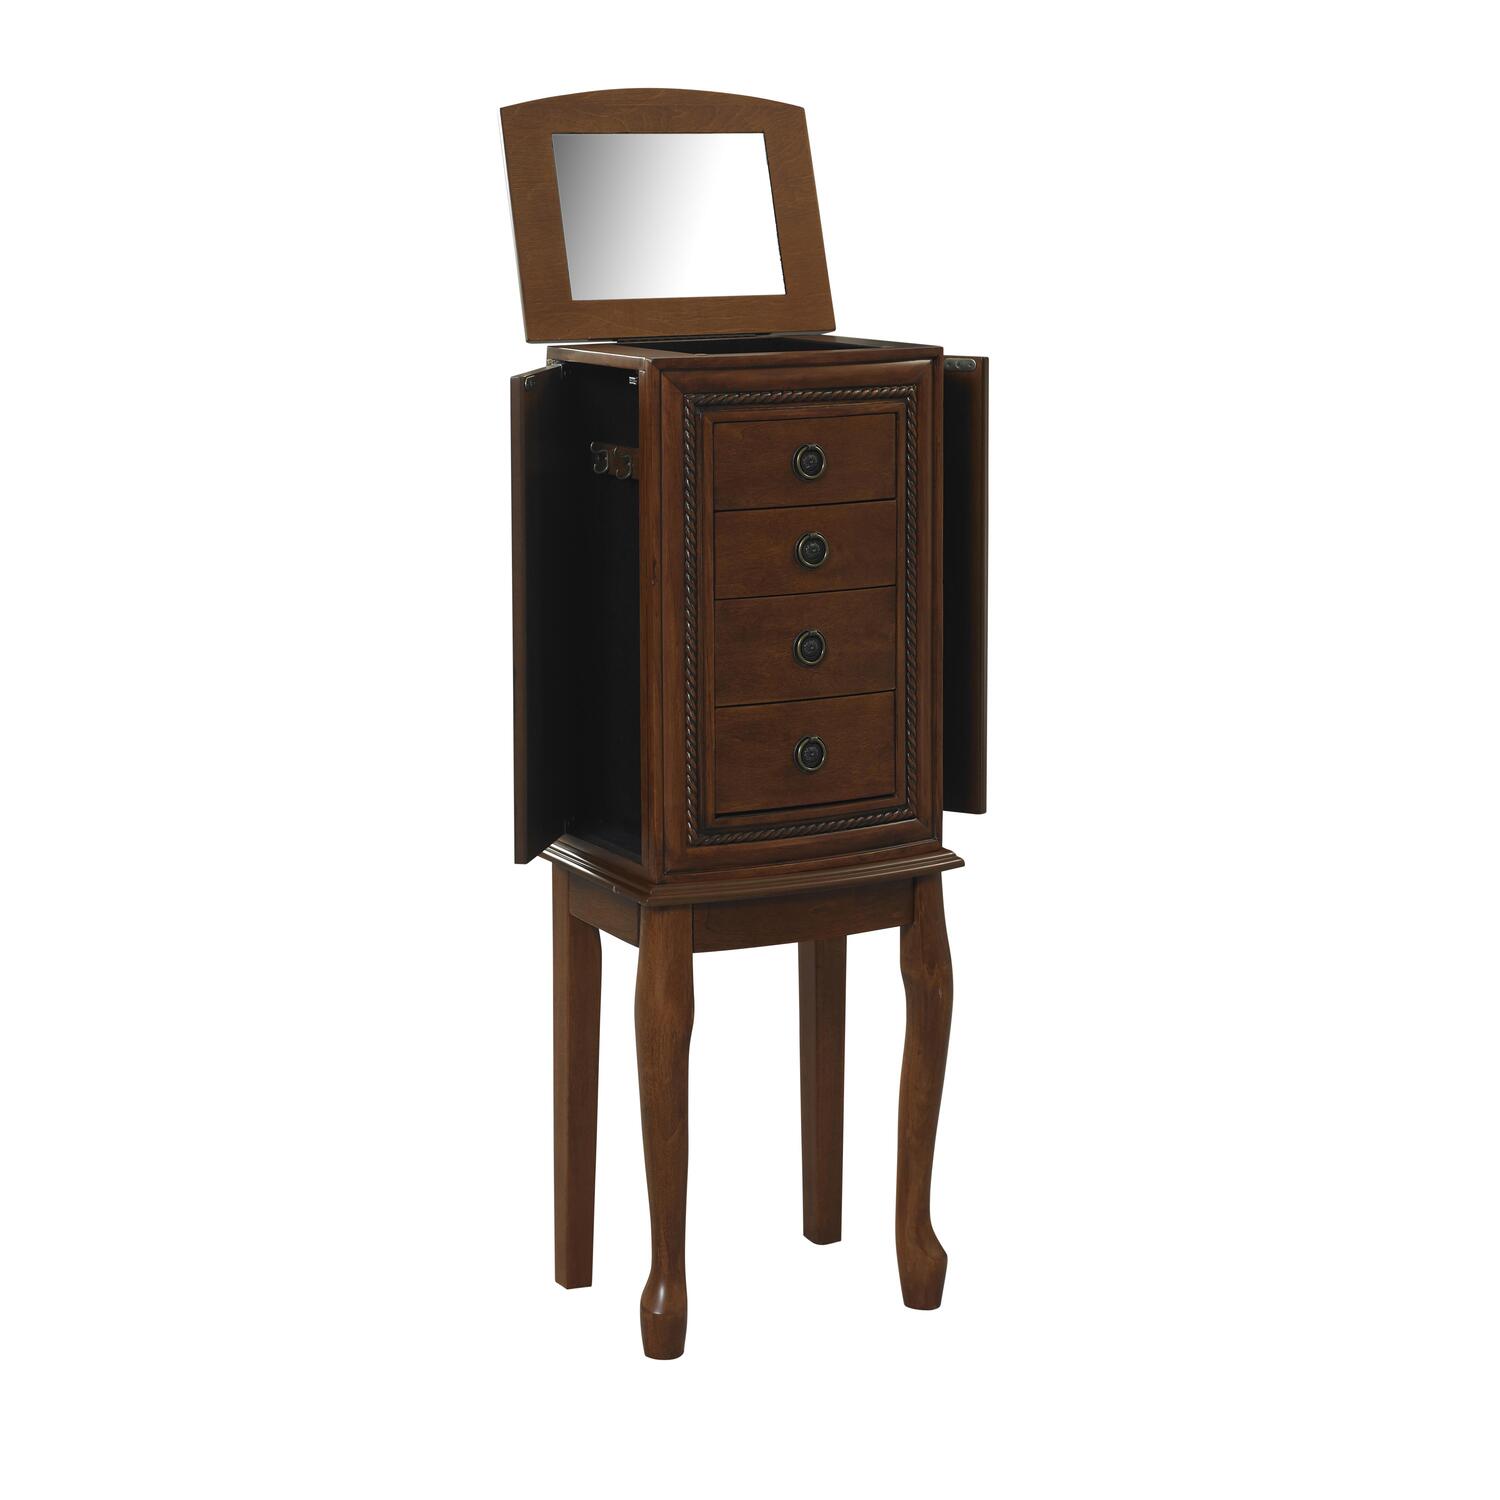 Grace Jewelry Armoire - image 2 of 2